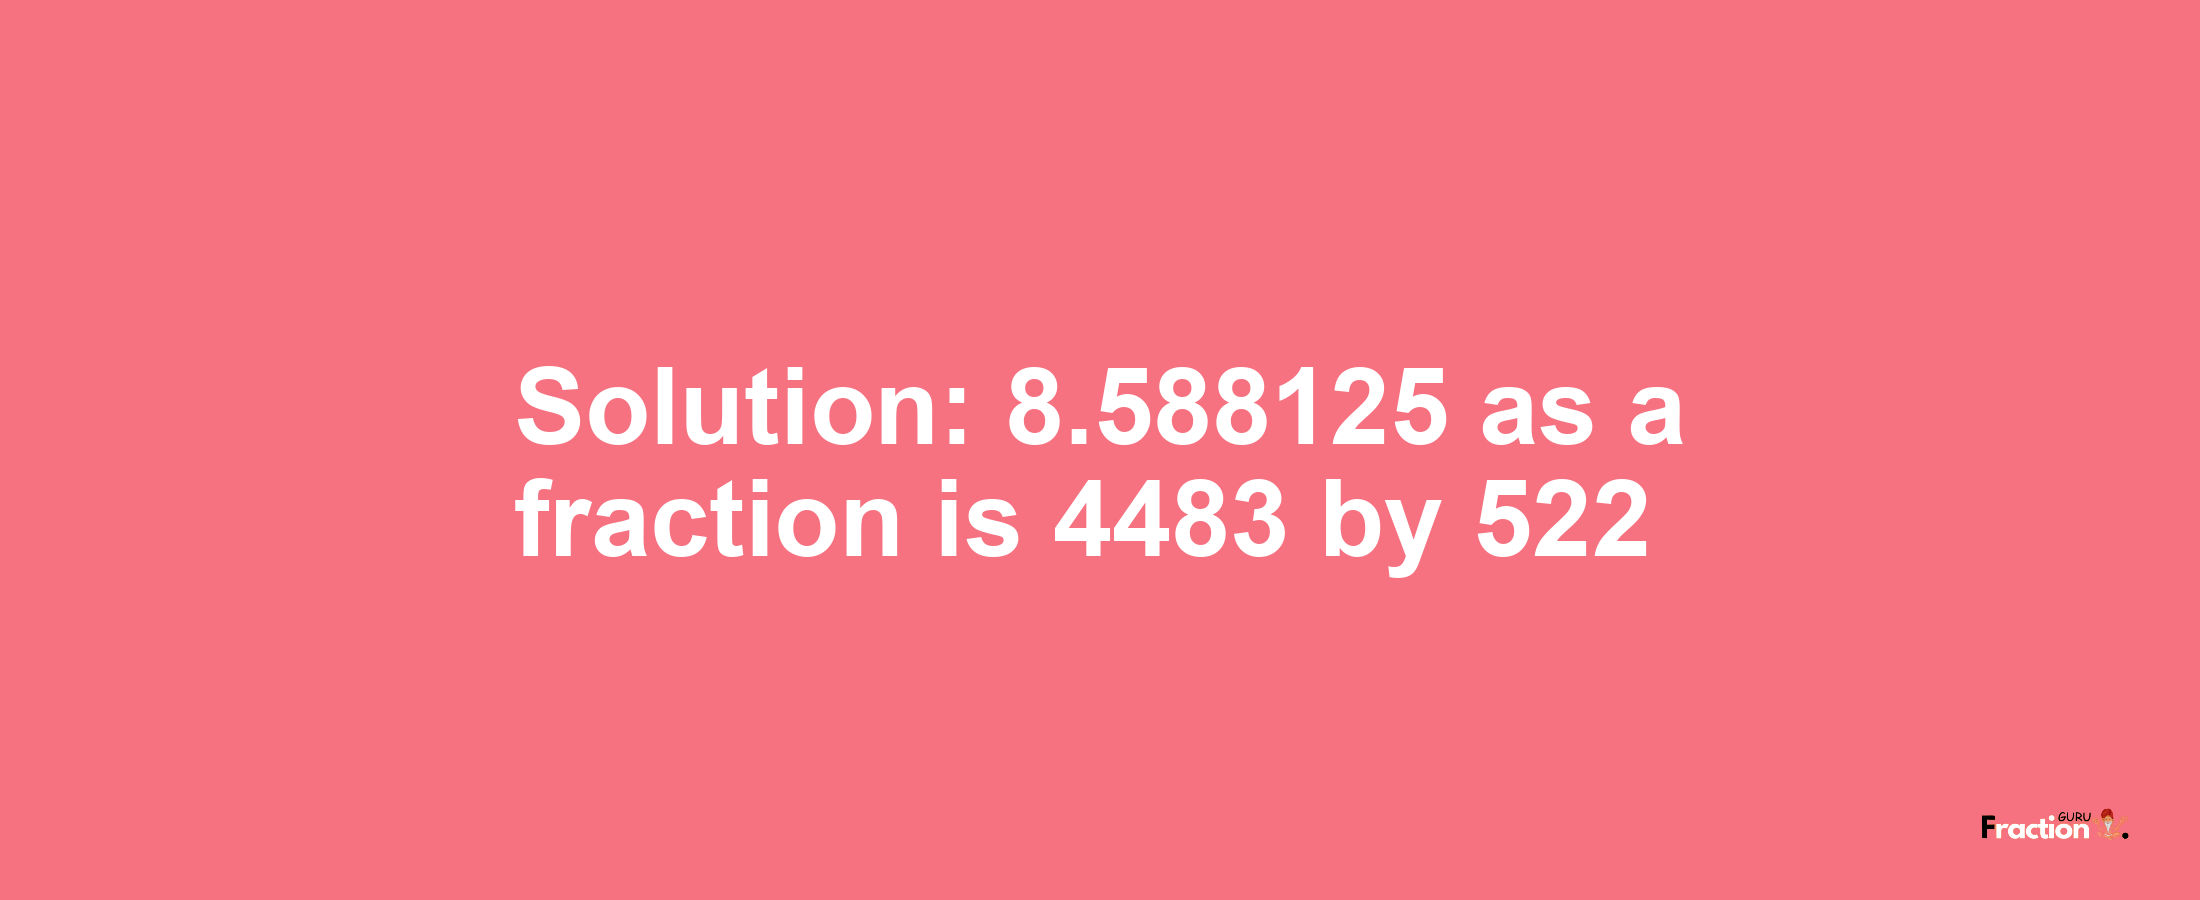 Solution:8.588125 as a fraction is 4483/522